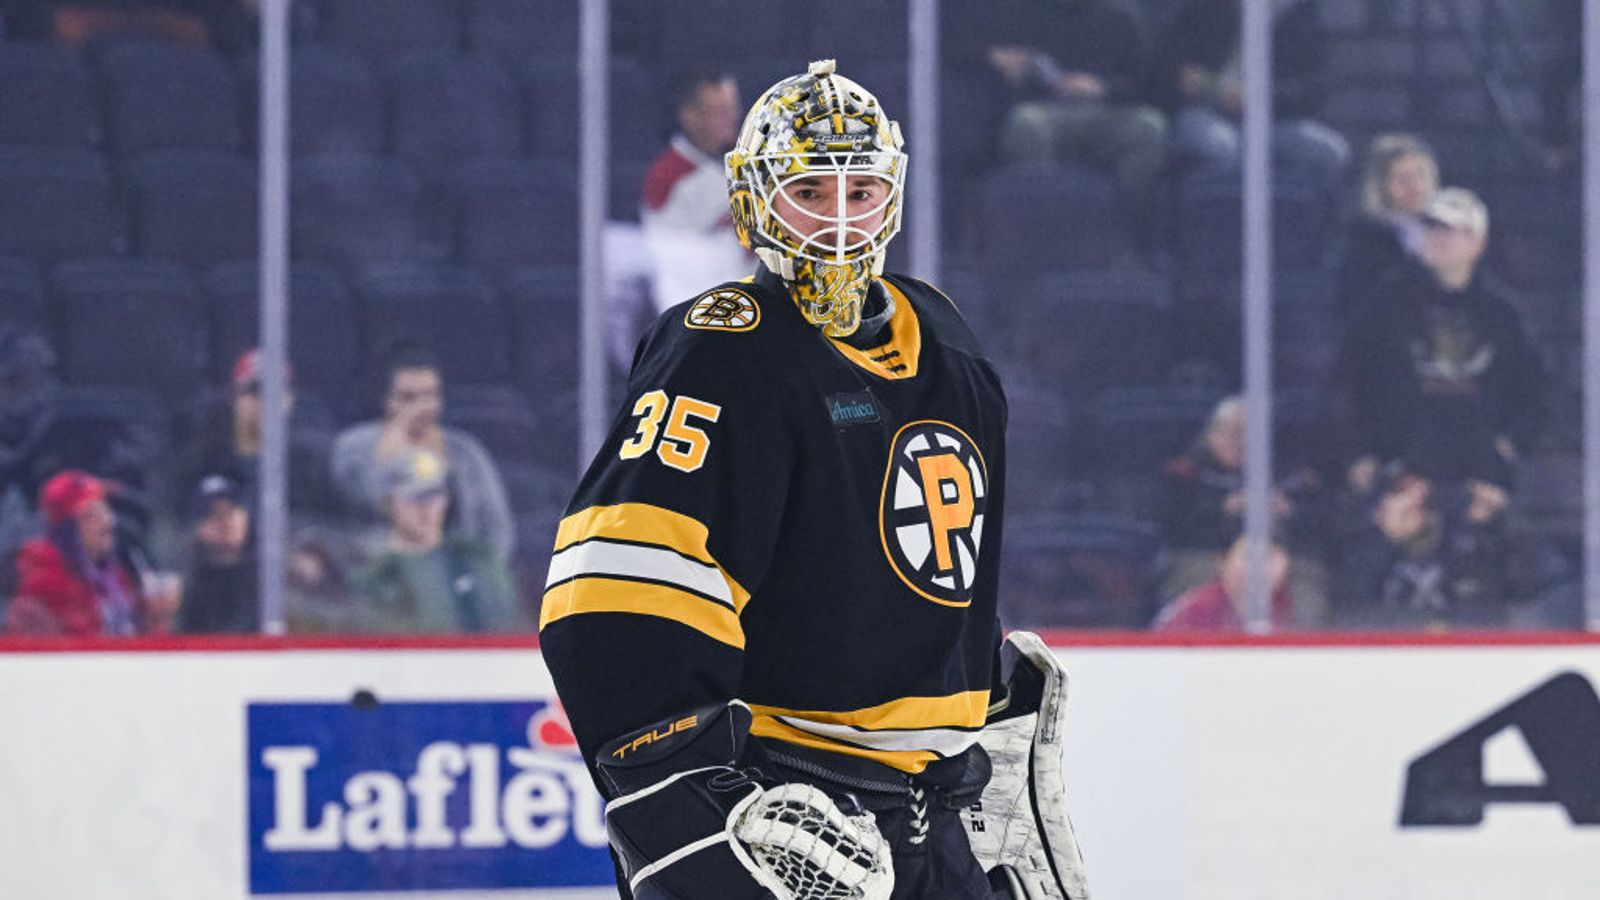 PROVIDENCE BRUINS RECALL BUSSI FROM MAINE